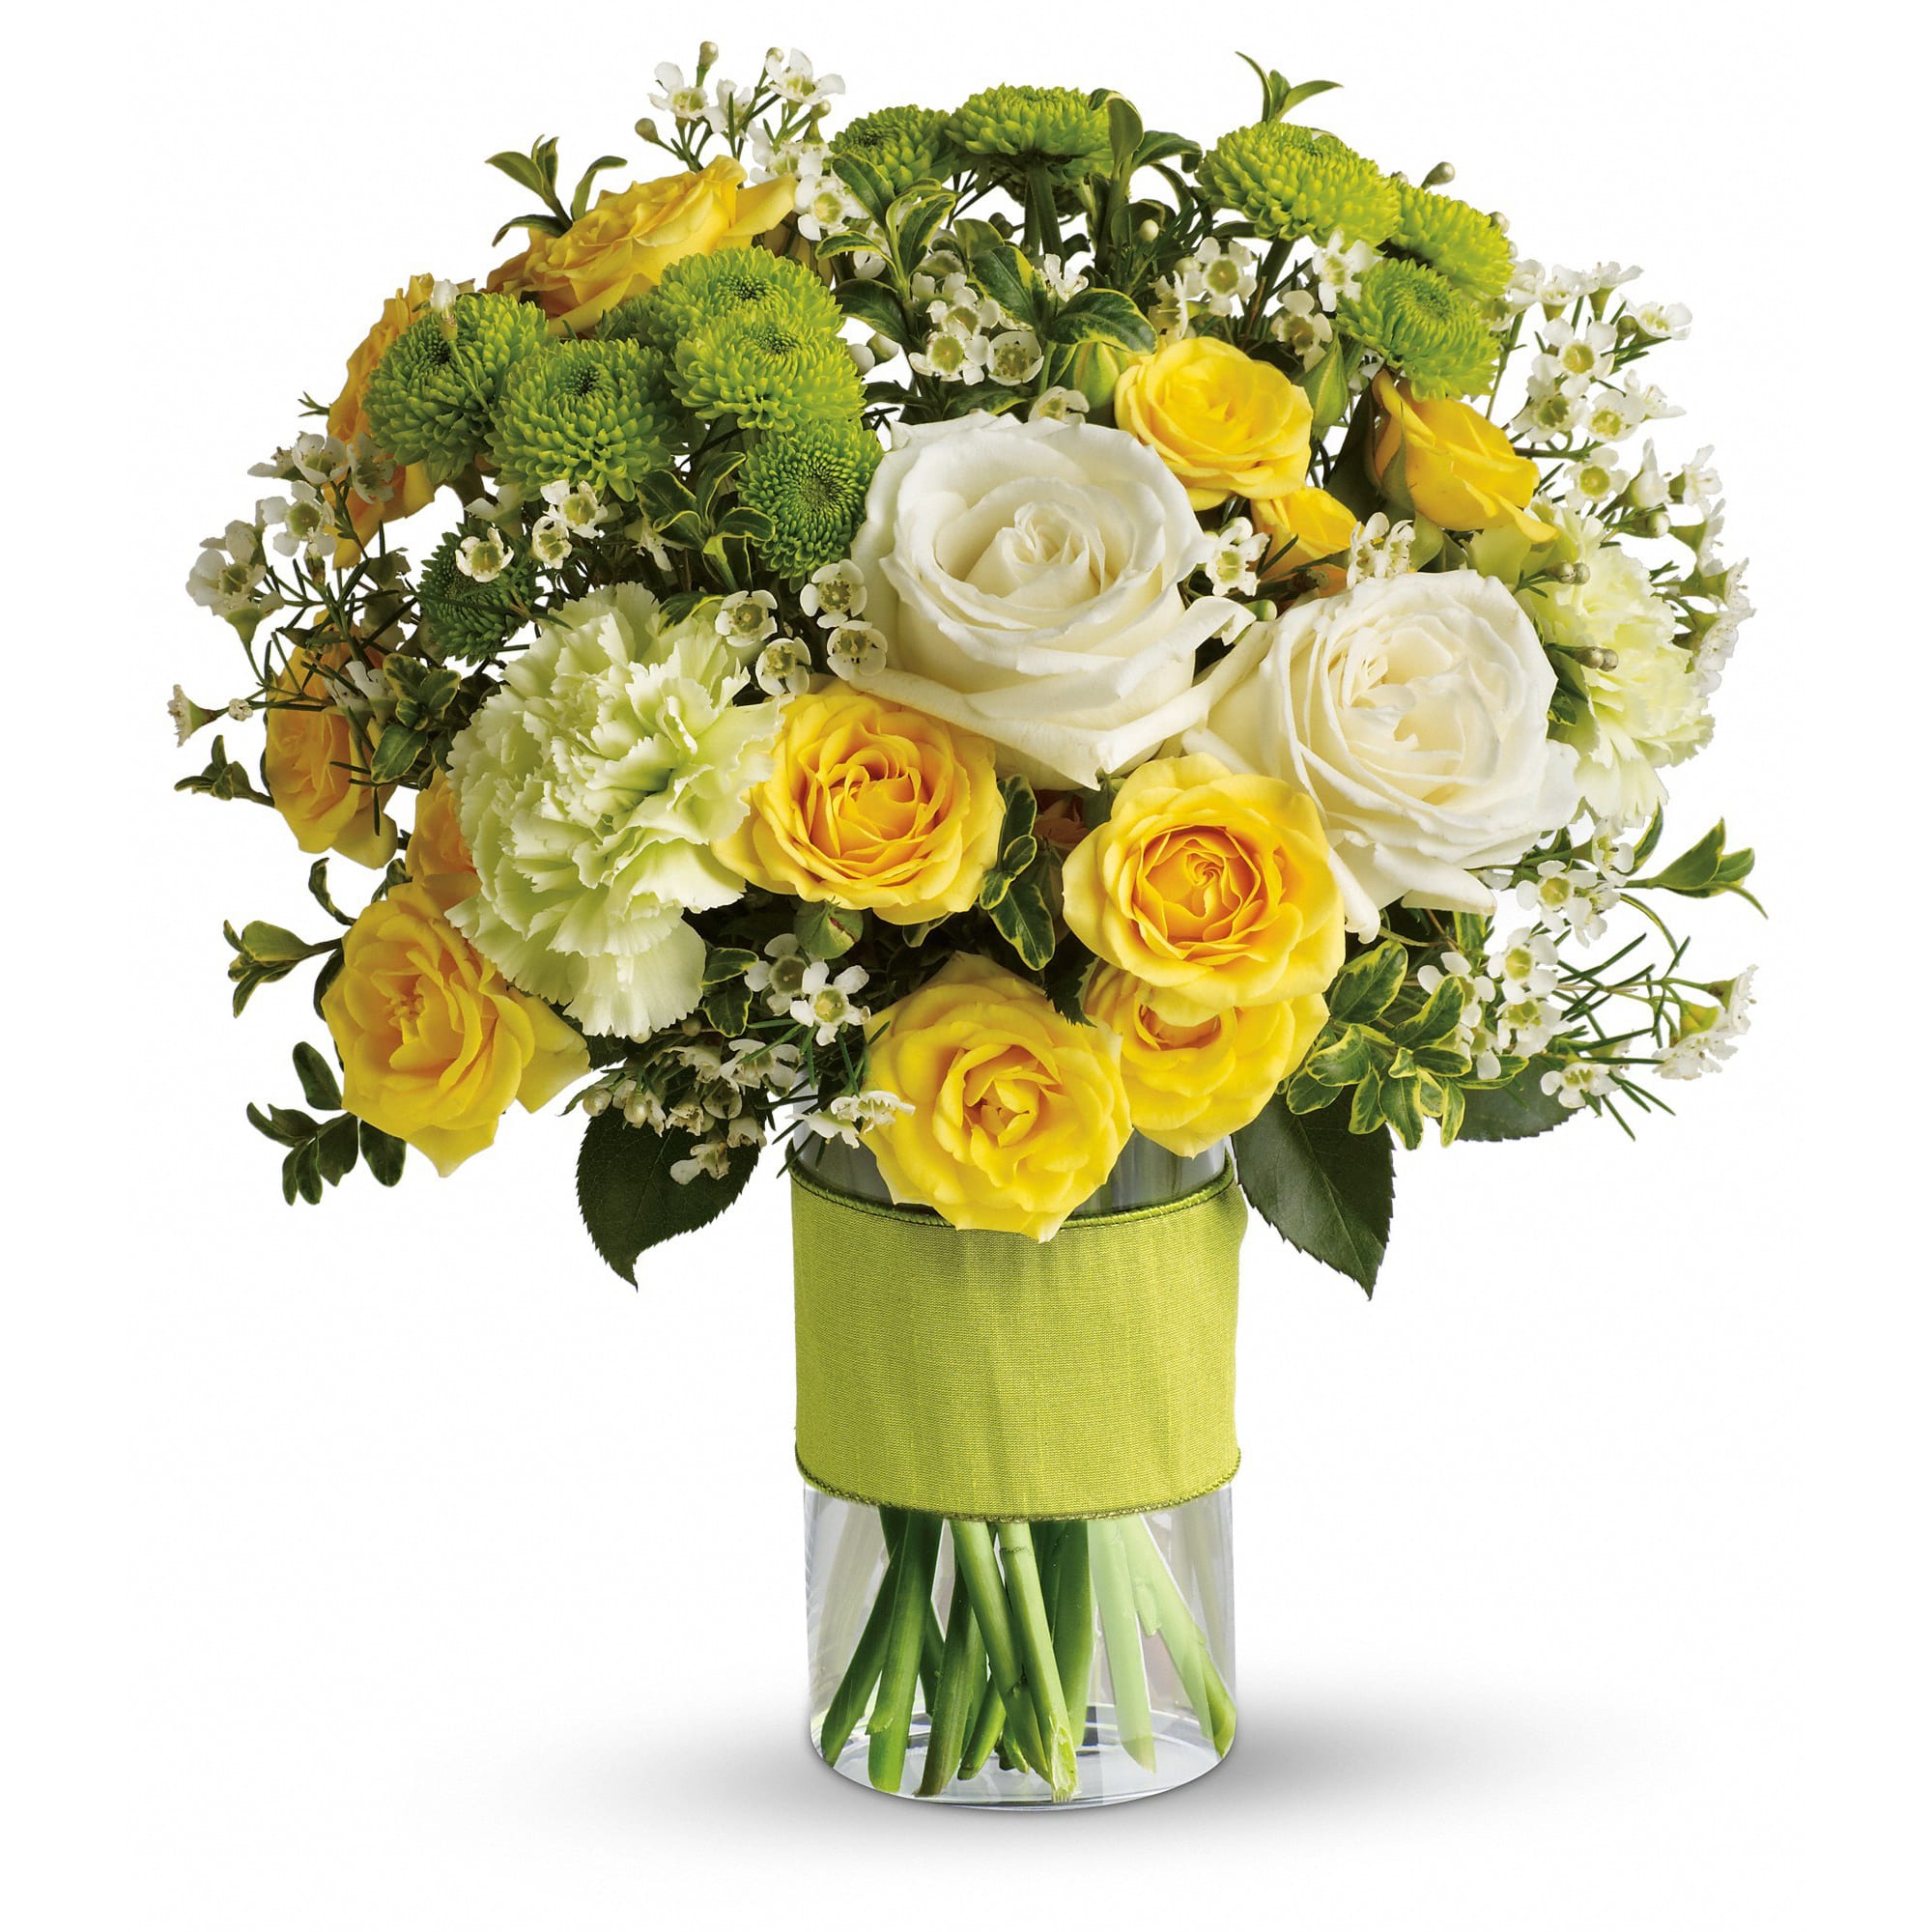 TEV11-1A - Your Sweet Smile - You could call or email that special someone, but why not put your feelings into flowers? She'll love this elegant array of white and yellow roses and other favorites in a stylish cylinder vase. She'll want to thank you in person. 